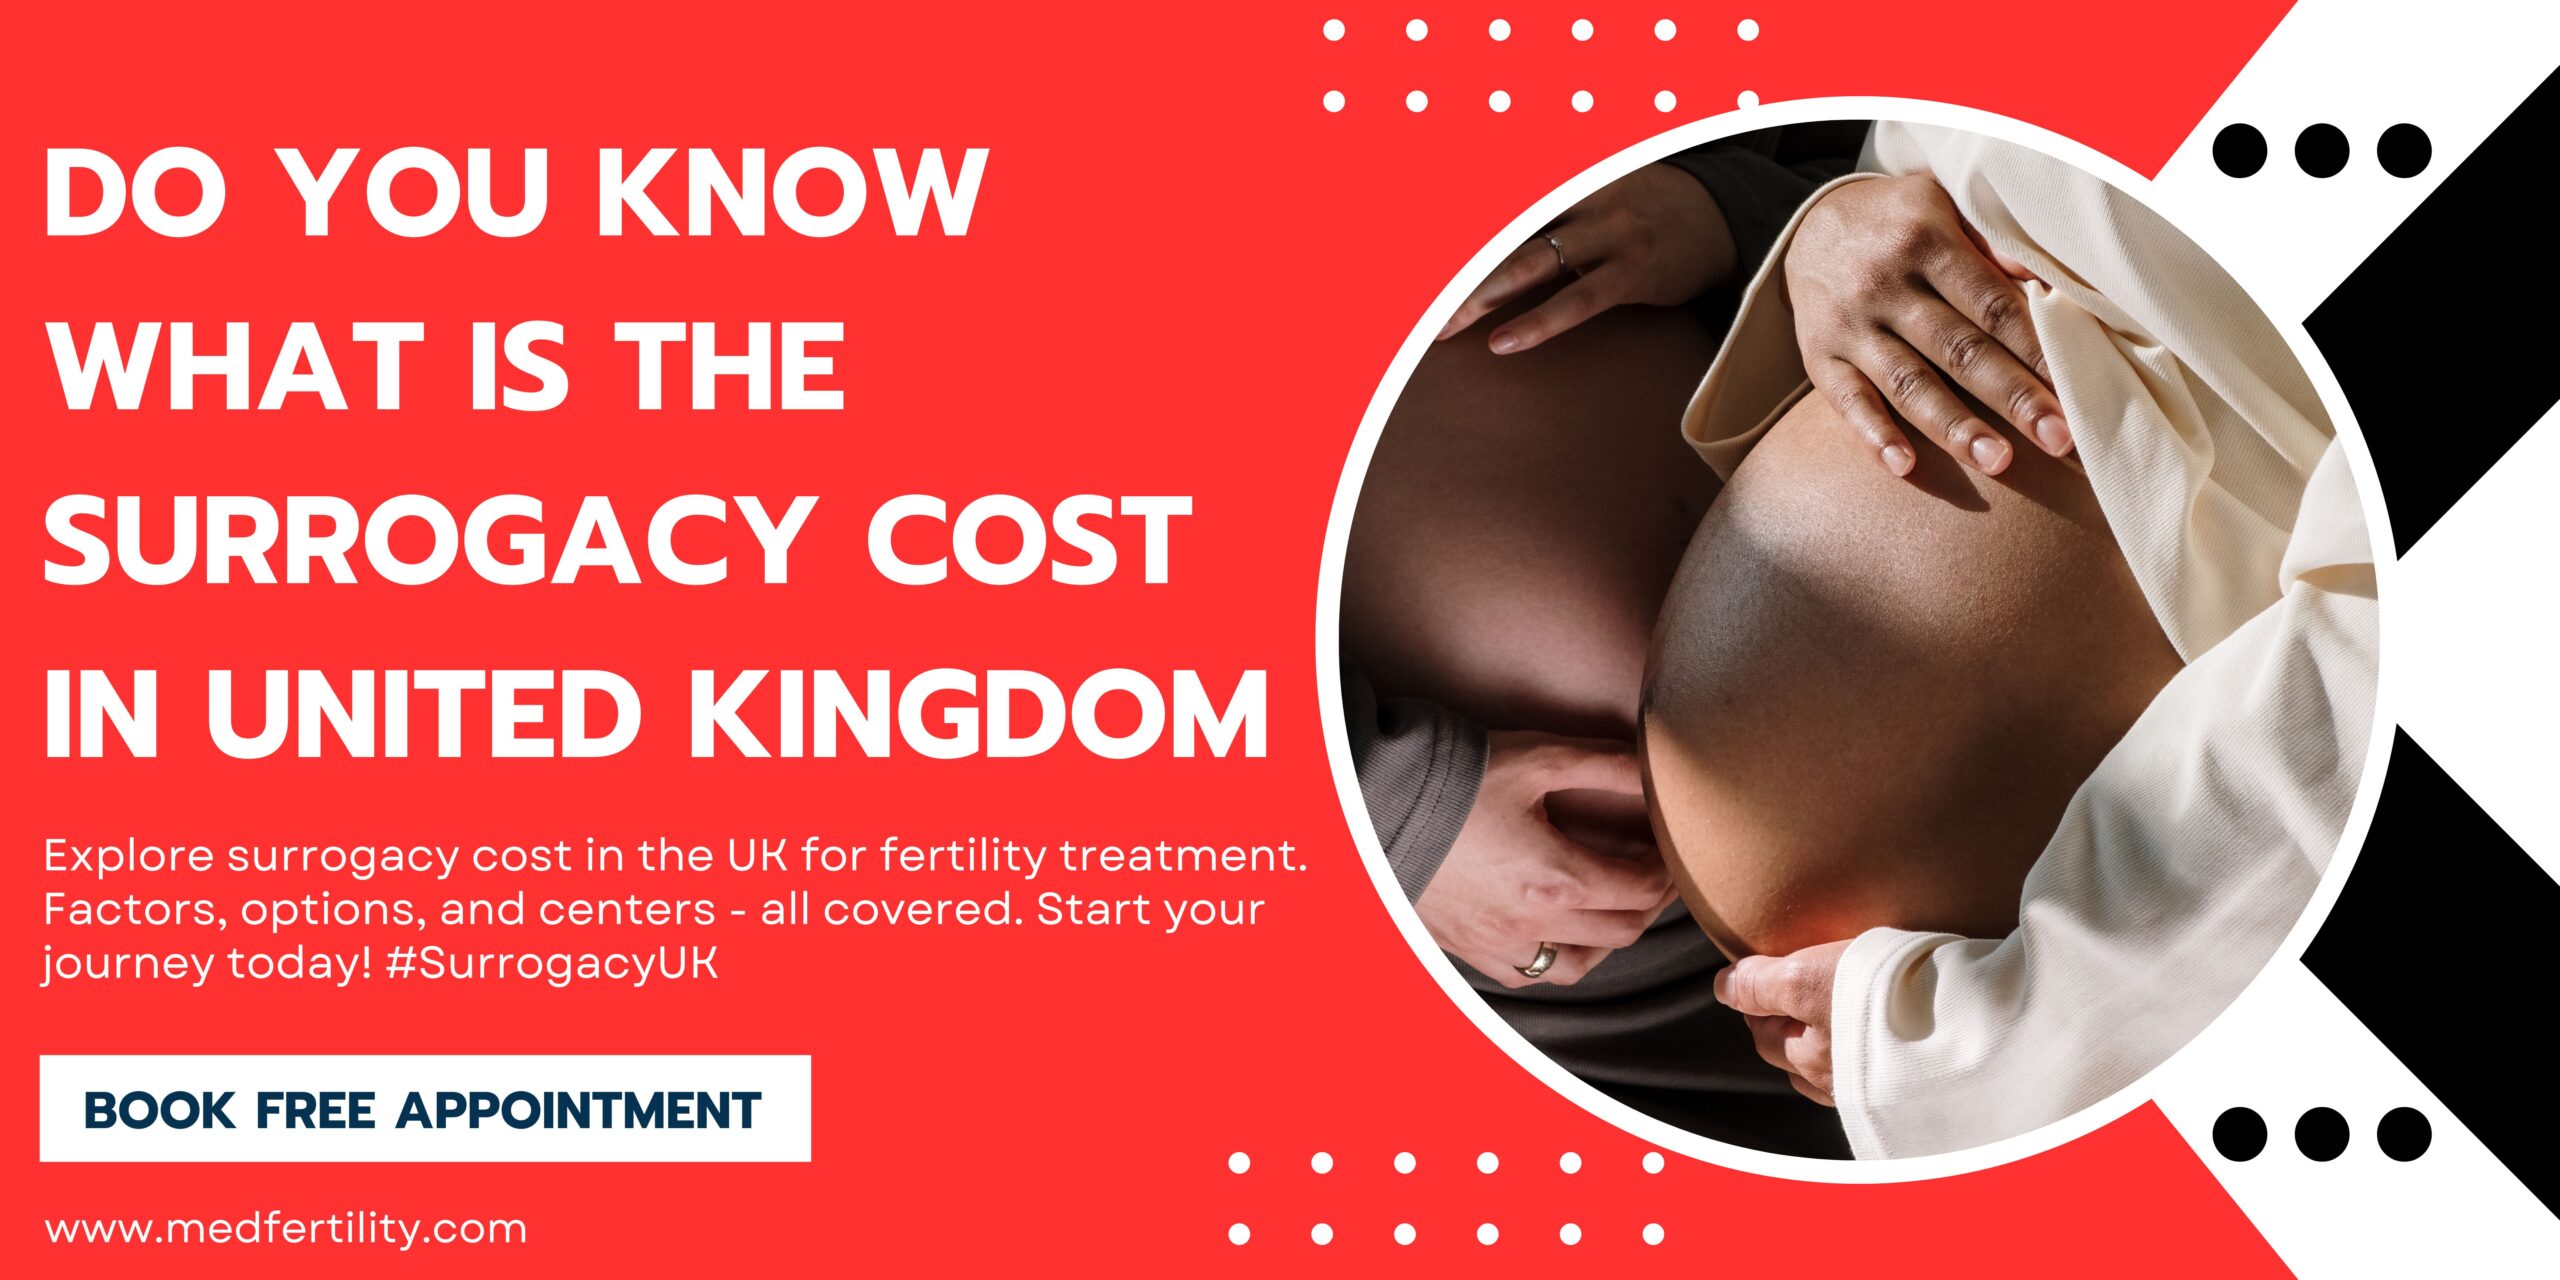 Do You Know What is The Surrogacy Cost in United Kingdom 2023